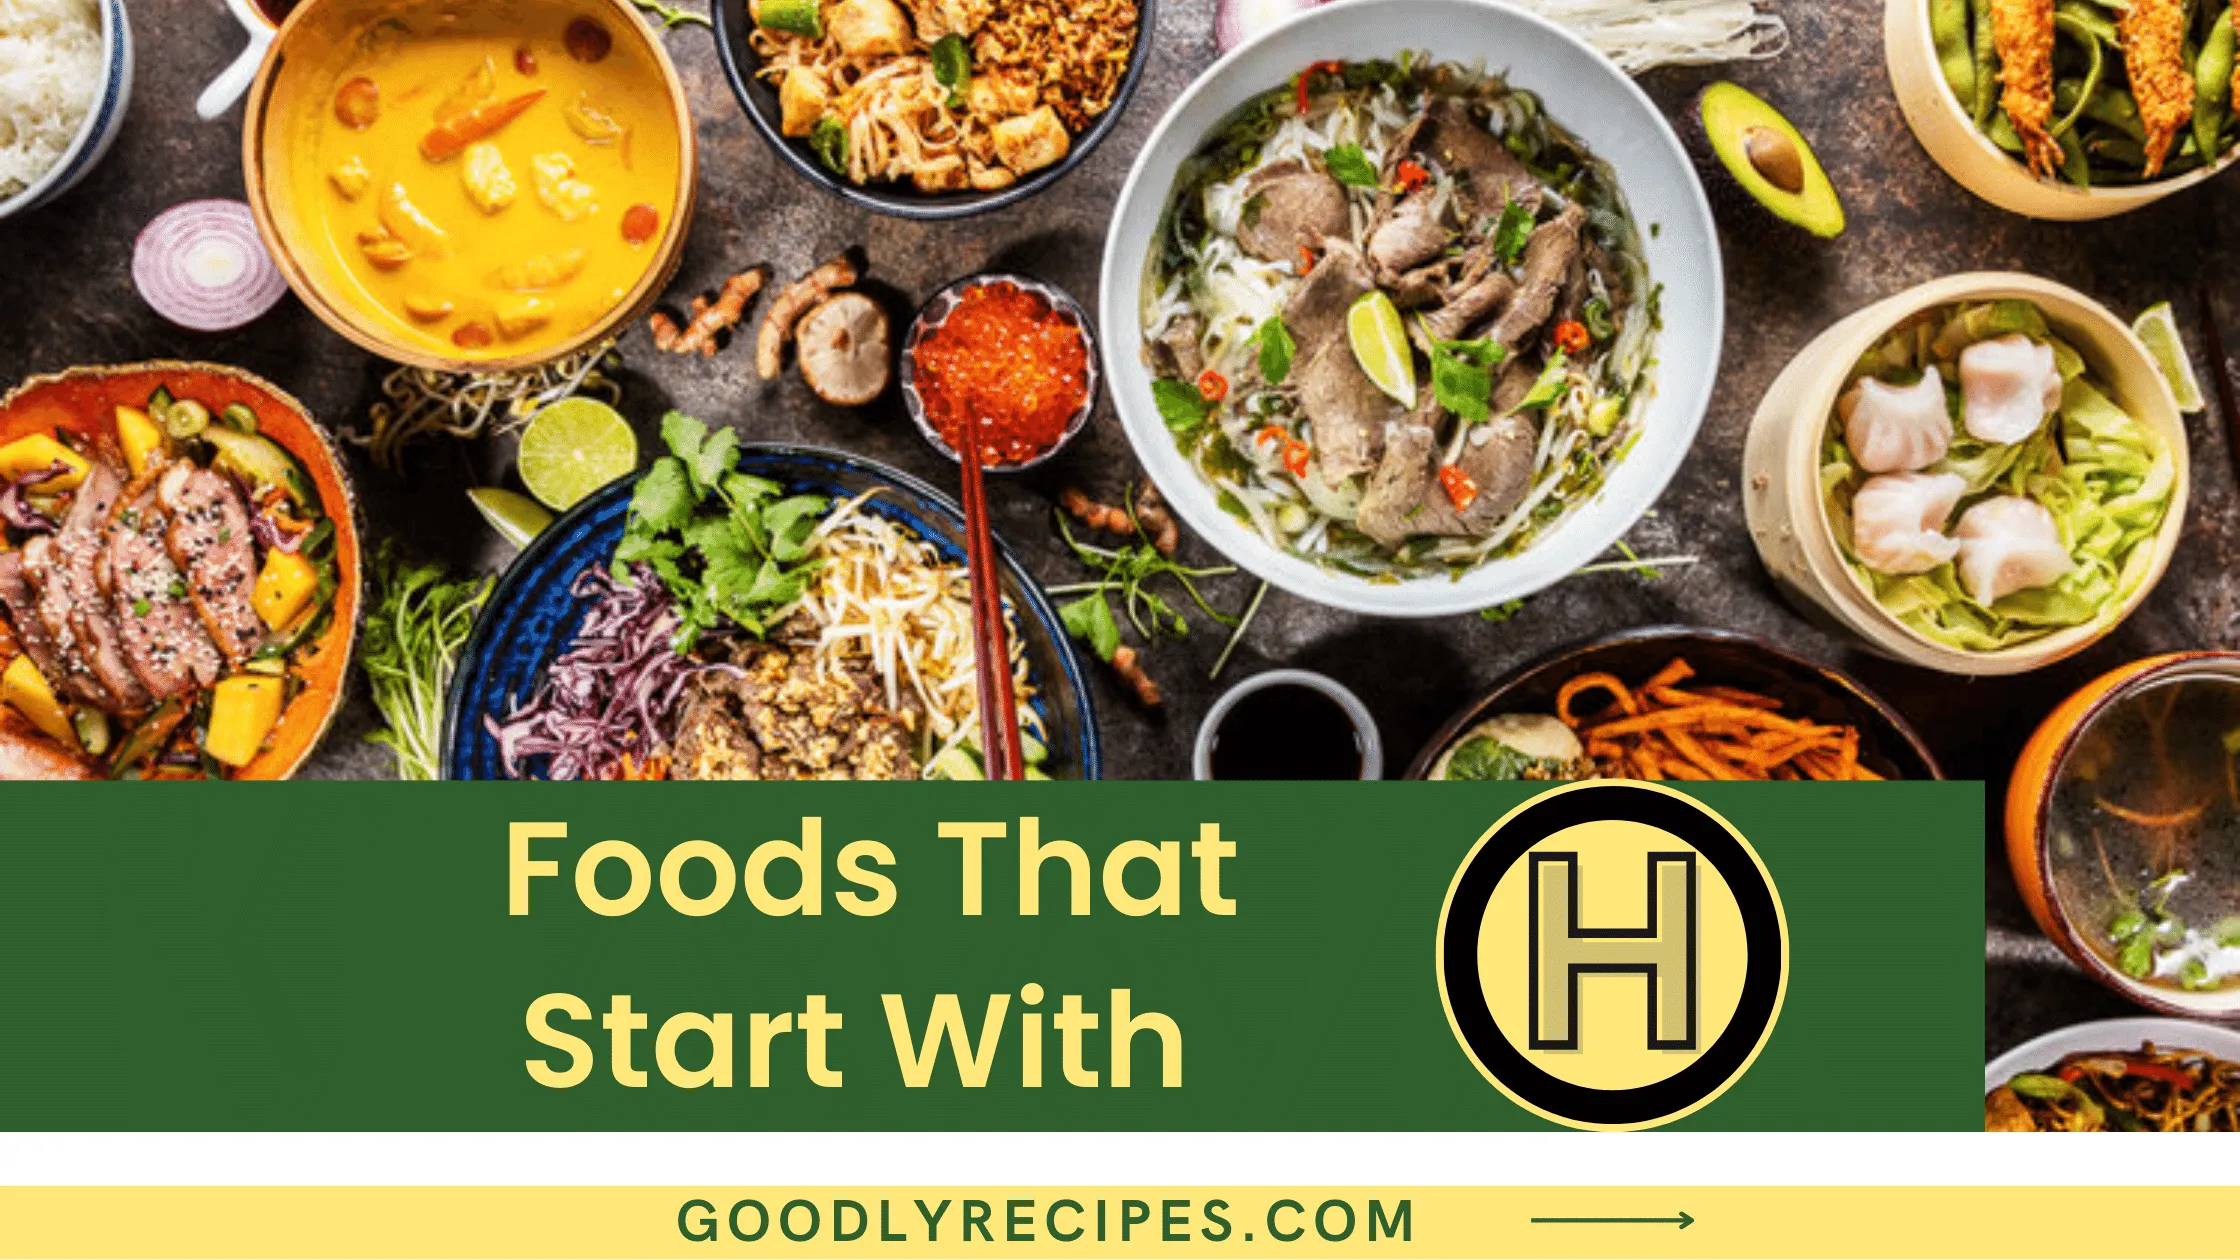 Foods That Start With H - Special Dishes